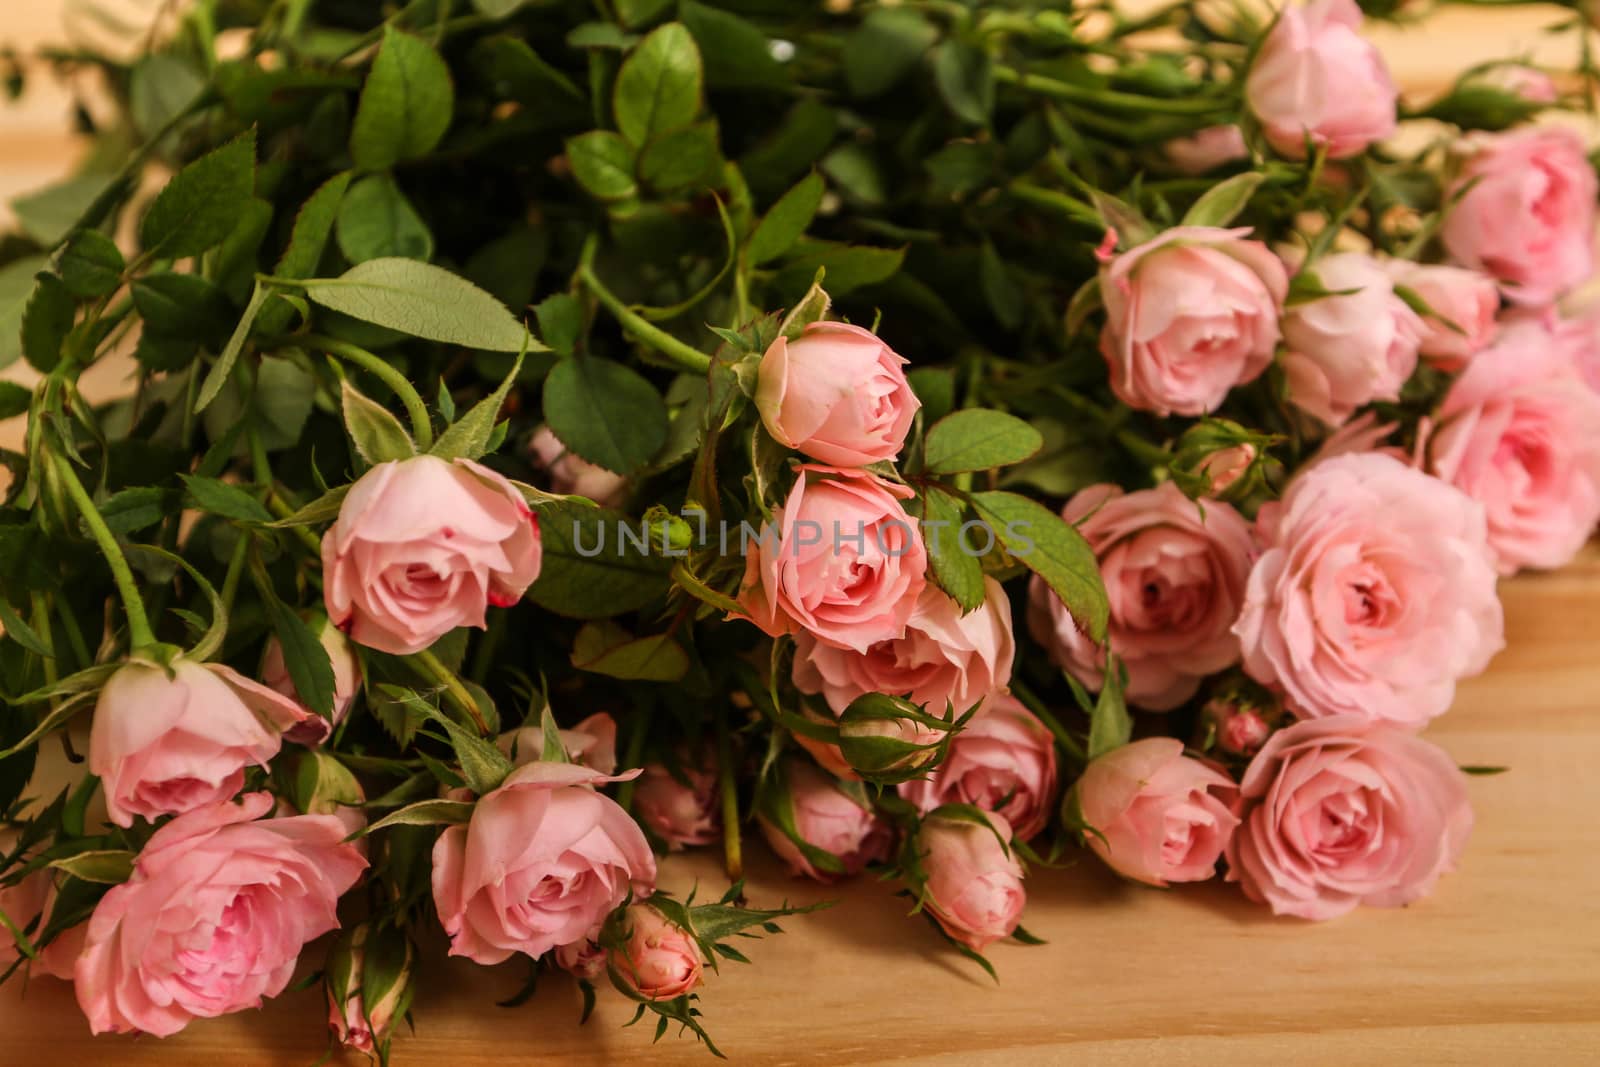 Bunch of small pink Roses.

